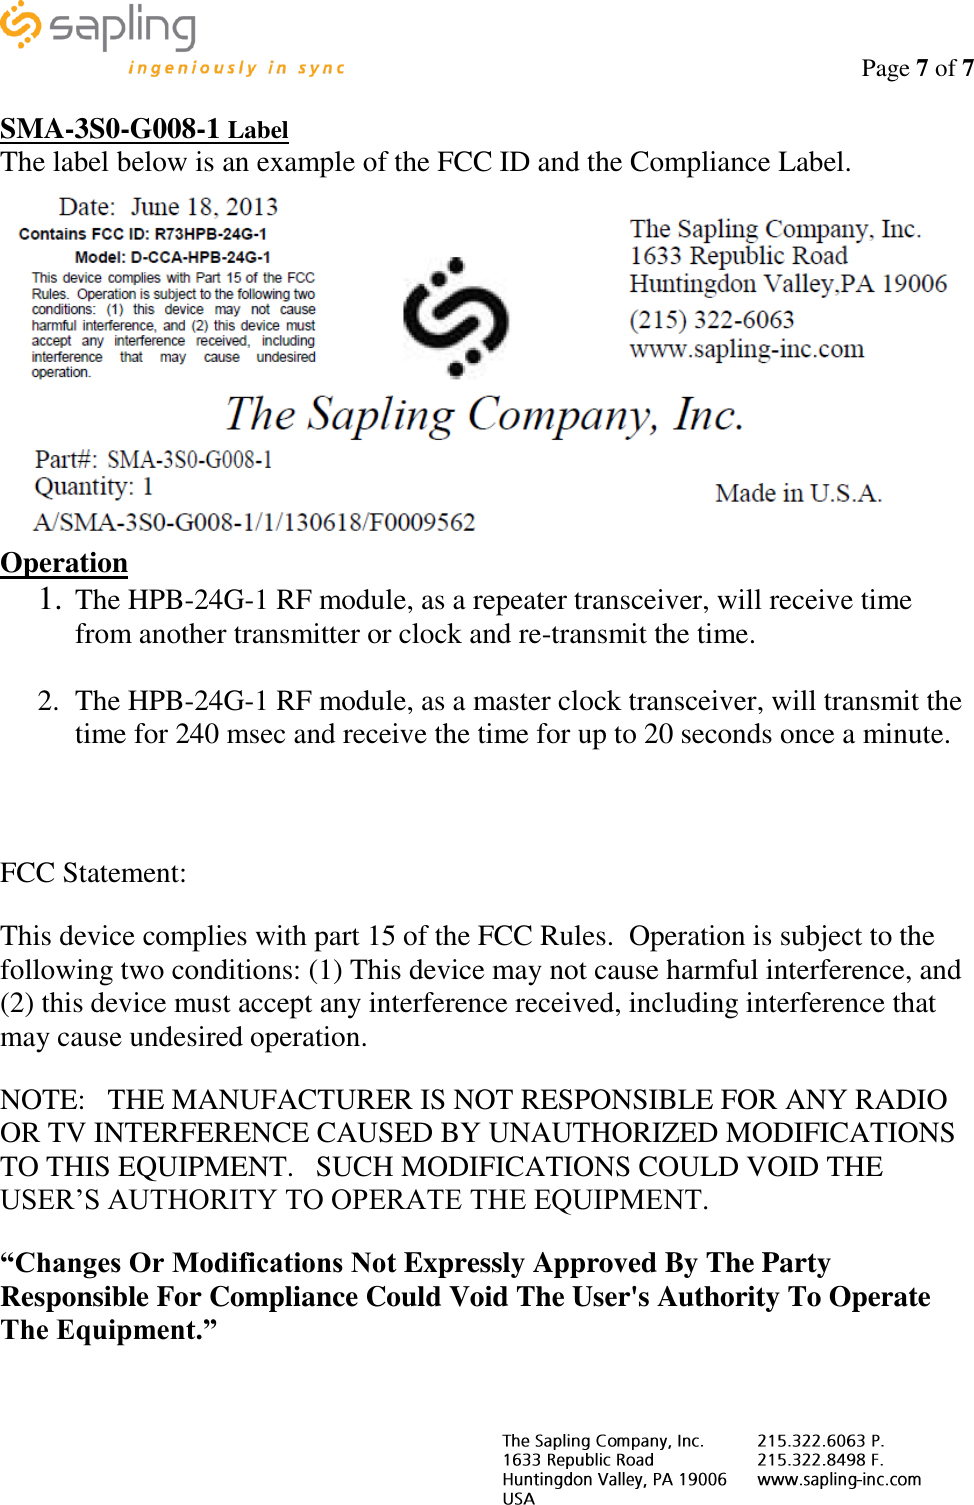                                                                                    Page 7 of 7     SMA-3S0-G008-1 Label The label below is an example of the FCC ID and the Compliance Label.  Operation 1. The HPB-24G-1 RF module, as a repeater transceiver, will receive time from another transmitter or clock and re-transmit the time.  2. The HPB-24G-1 RF module, as a master clock transceiver, will transmit the time for 240 msec and receive the time for up to 20 seconds once a minute.   FCC Statement: This device complies with part 15 of the FCC Rules.  Operation is subject to the following two conditions: (1) This device may not cause harmful interference, and (2) this device must accept any interference received, including interference that may cause undesired operation. NOTE:   THE MANUFACTURER IS NOT RESPONSIBLE FOR ANY RADIO OR TV INTERFERENCE CAUSED BY UNAUTHORIZED MODIFICATIONS TO THIS EQUIPMENT.   SUCH MODIFICATIONS COULD VOID THE USER’S AUTHORITY TO OPERATE THE EQUIPMENT. “Changes Or Modifications Not Expressly Approved By The Party Responsible For Compliance Could Void The User&apos;s Authority To Operate The Equipment.”  